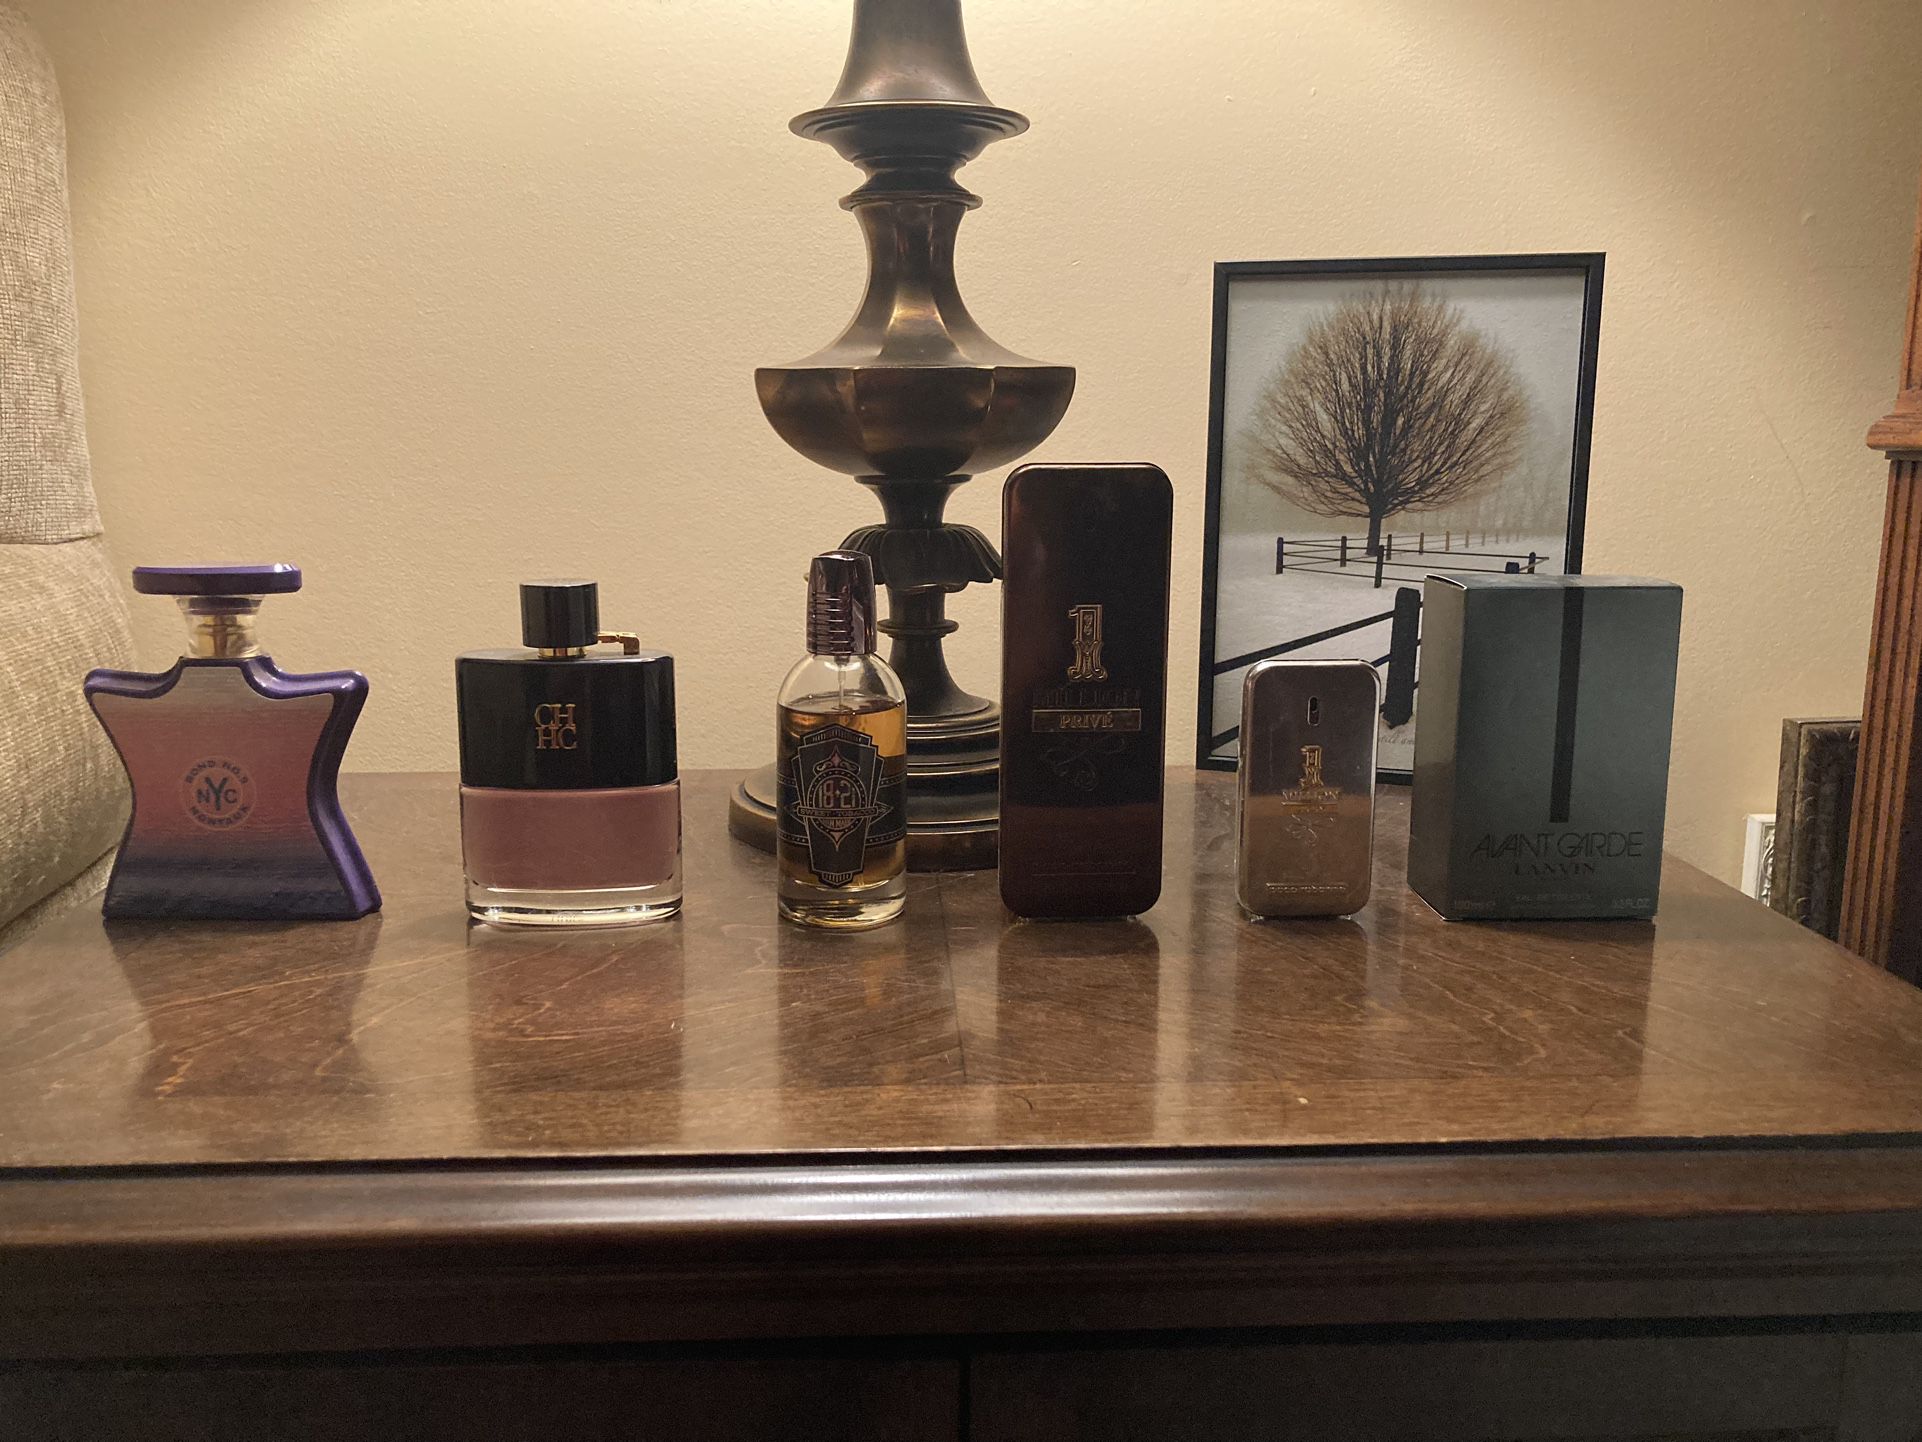 Men’s Colognes/Priced Individually 